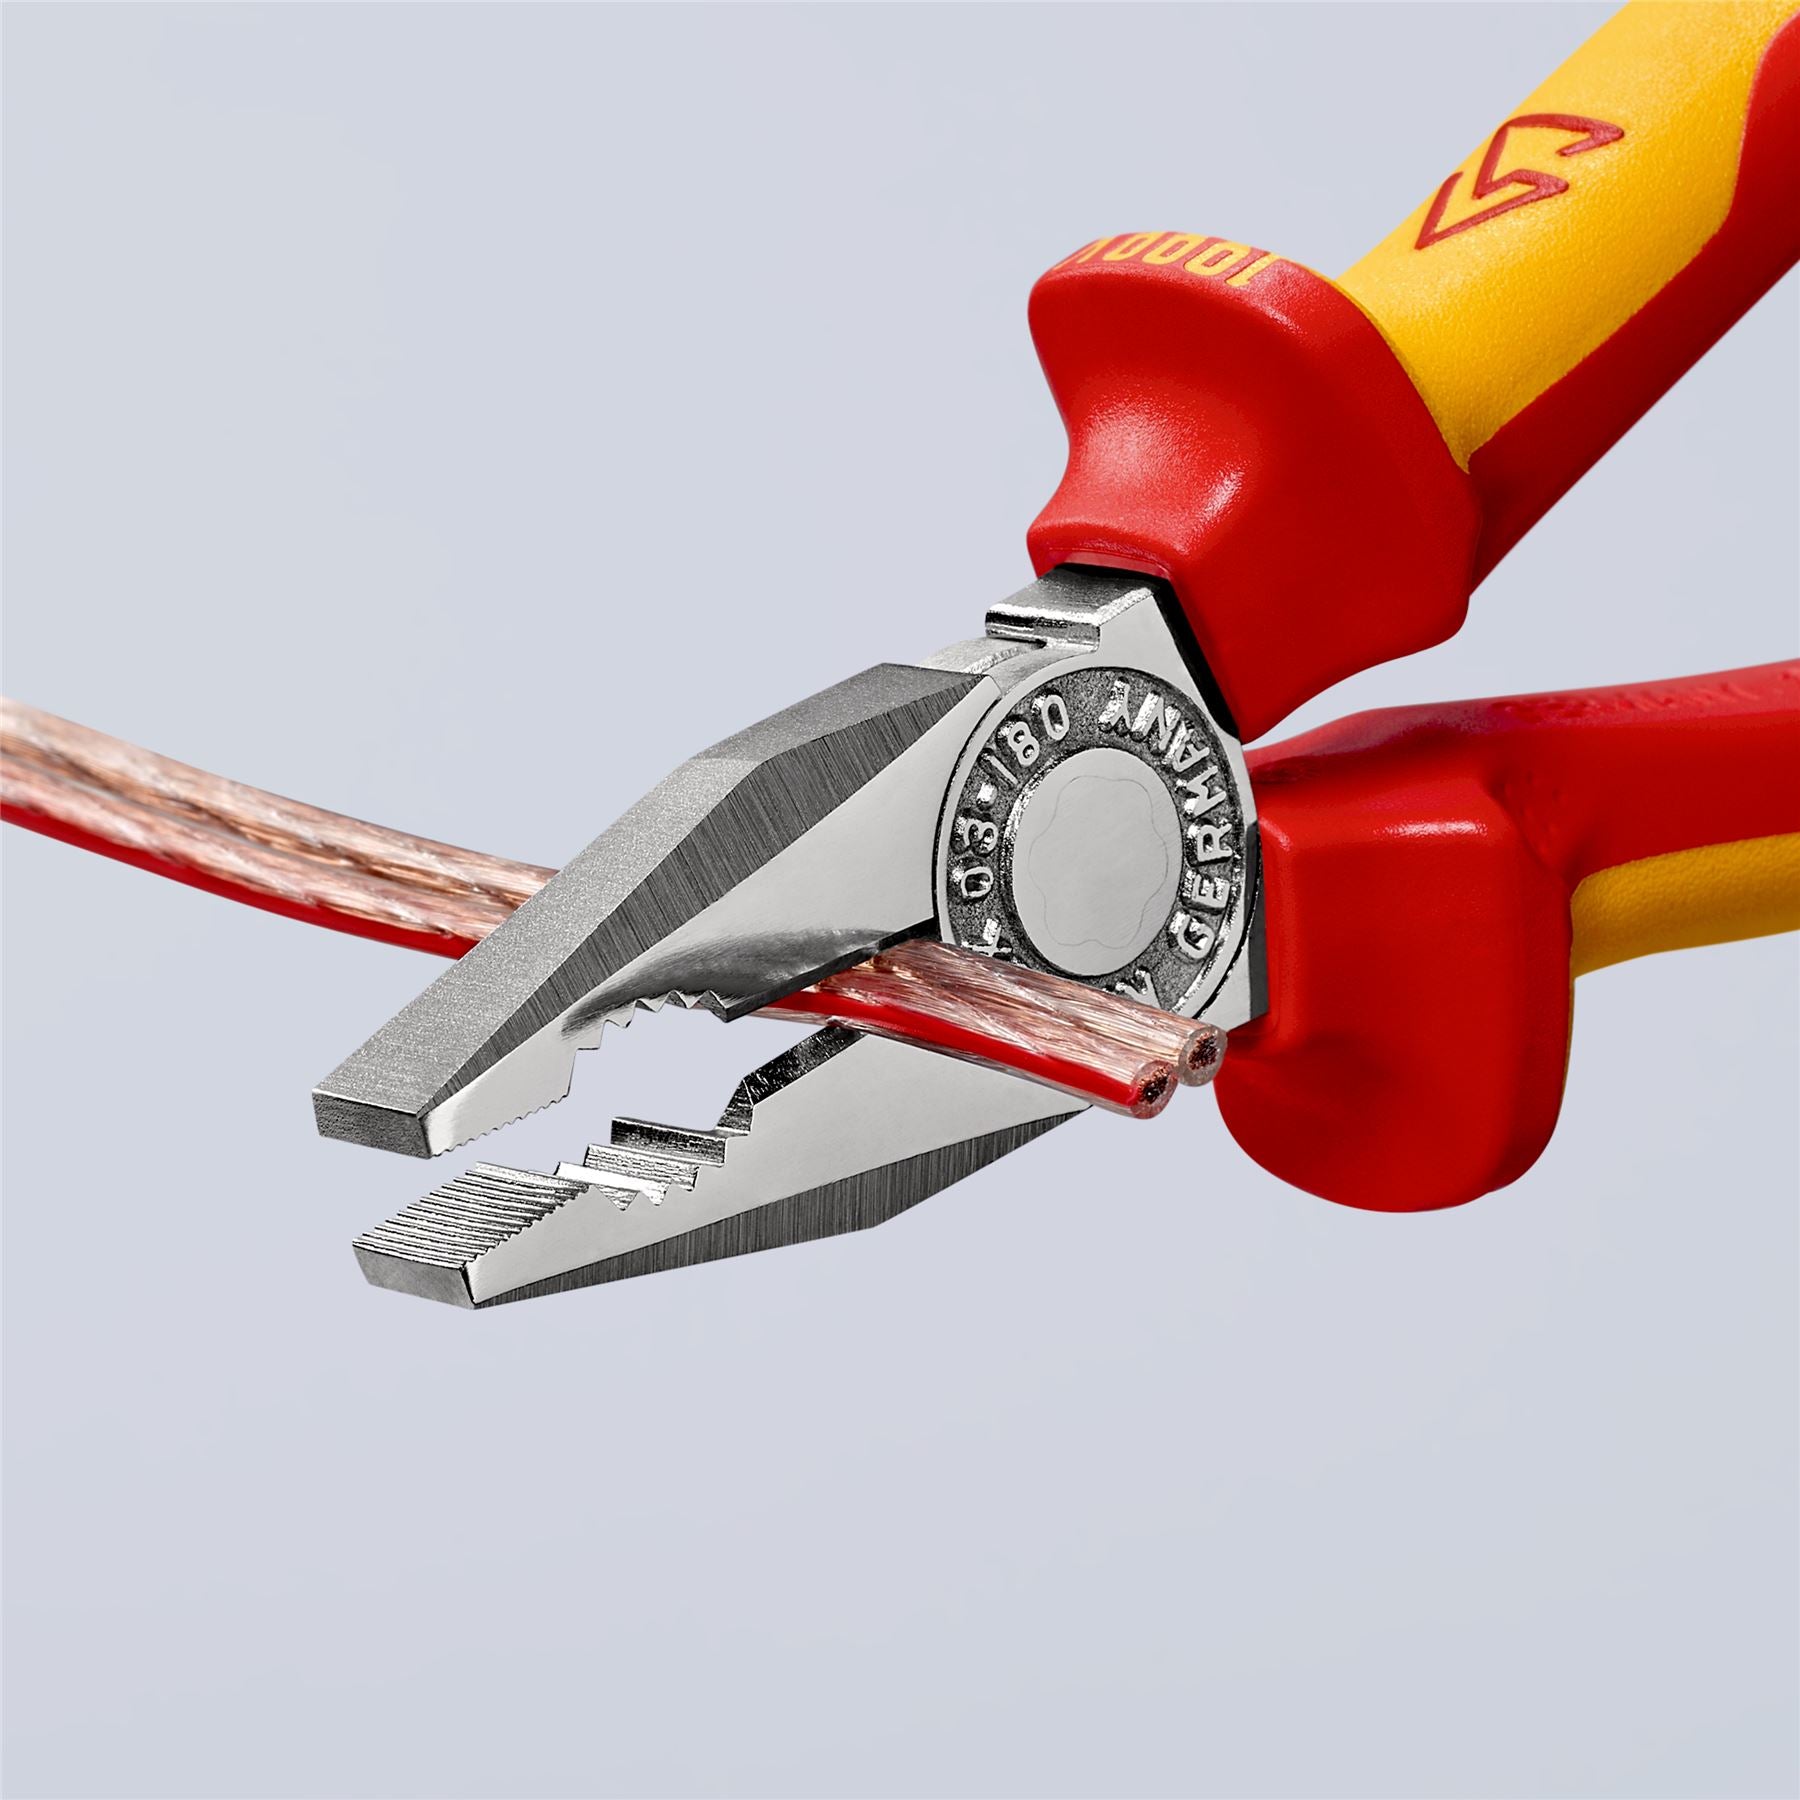 KNIPEX Combination Pliers 180mm VDE Chrome Multi Component Grips with Tether Point 03 06 180 T BK